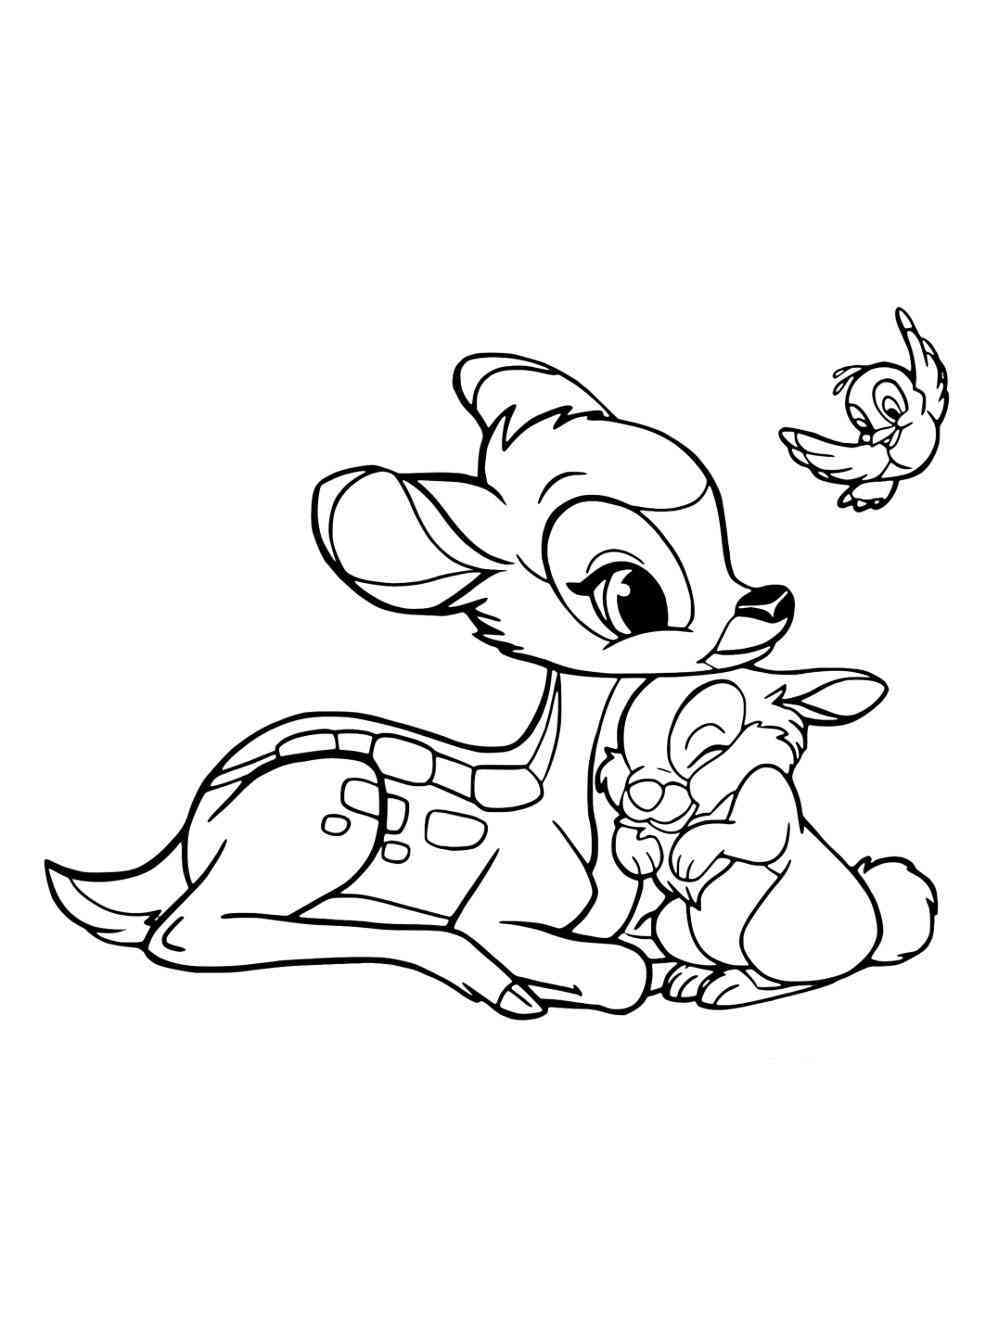 Bambi and Friends coloring pages. Free Printable Bambi and Friends ...